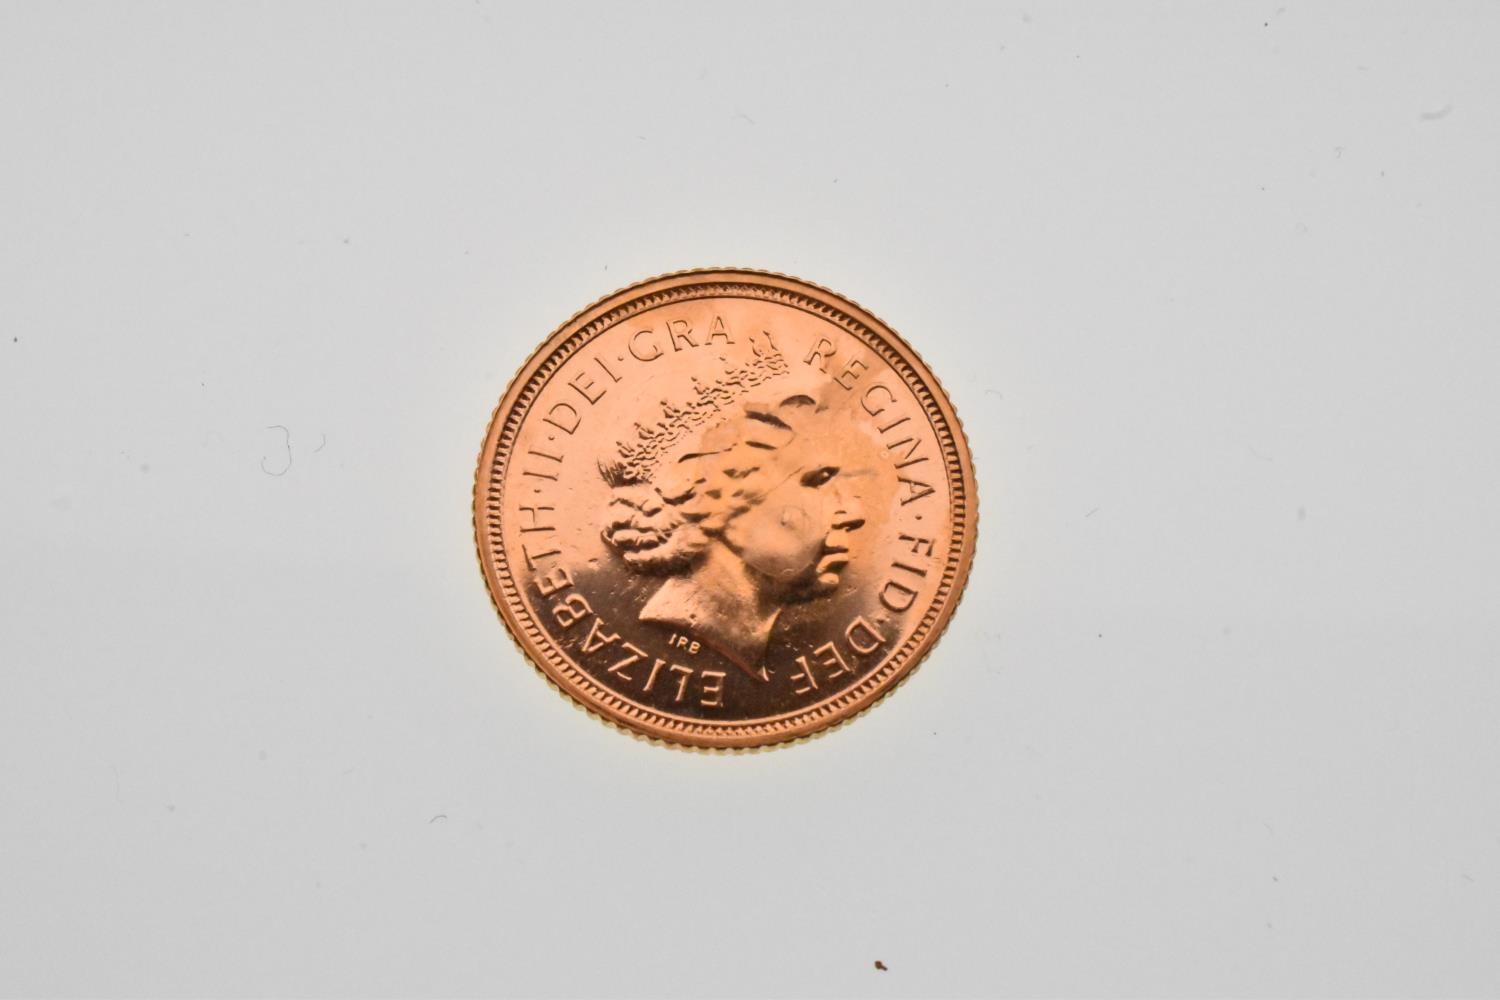 United Kingdom - Elizabeth II (1952-2022), Gold Half Sovereign, dated 2005, featuring the modern - Image 3 of 3